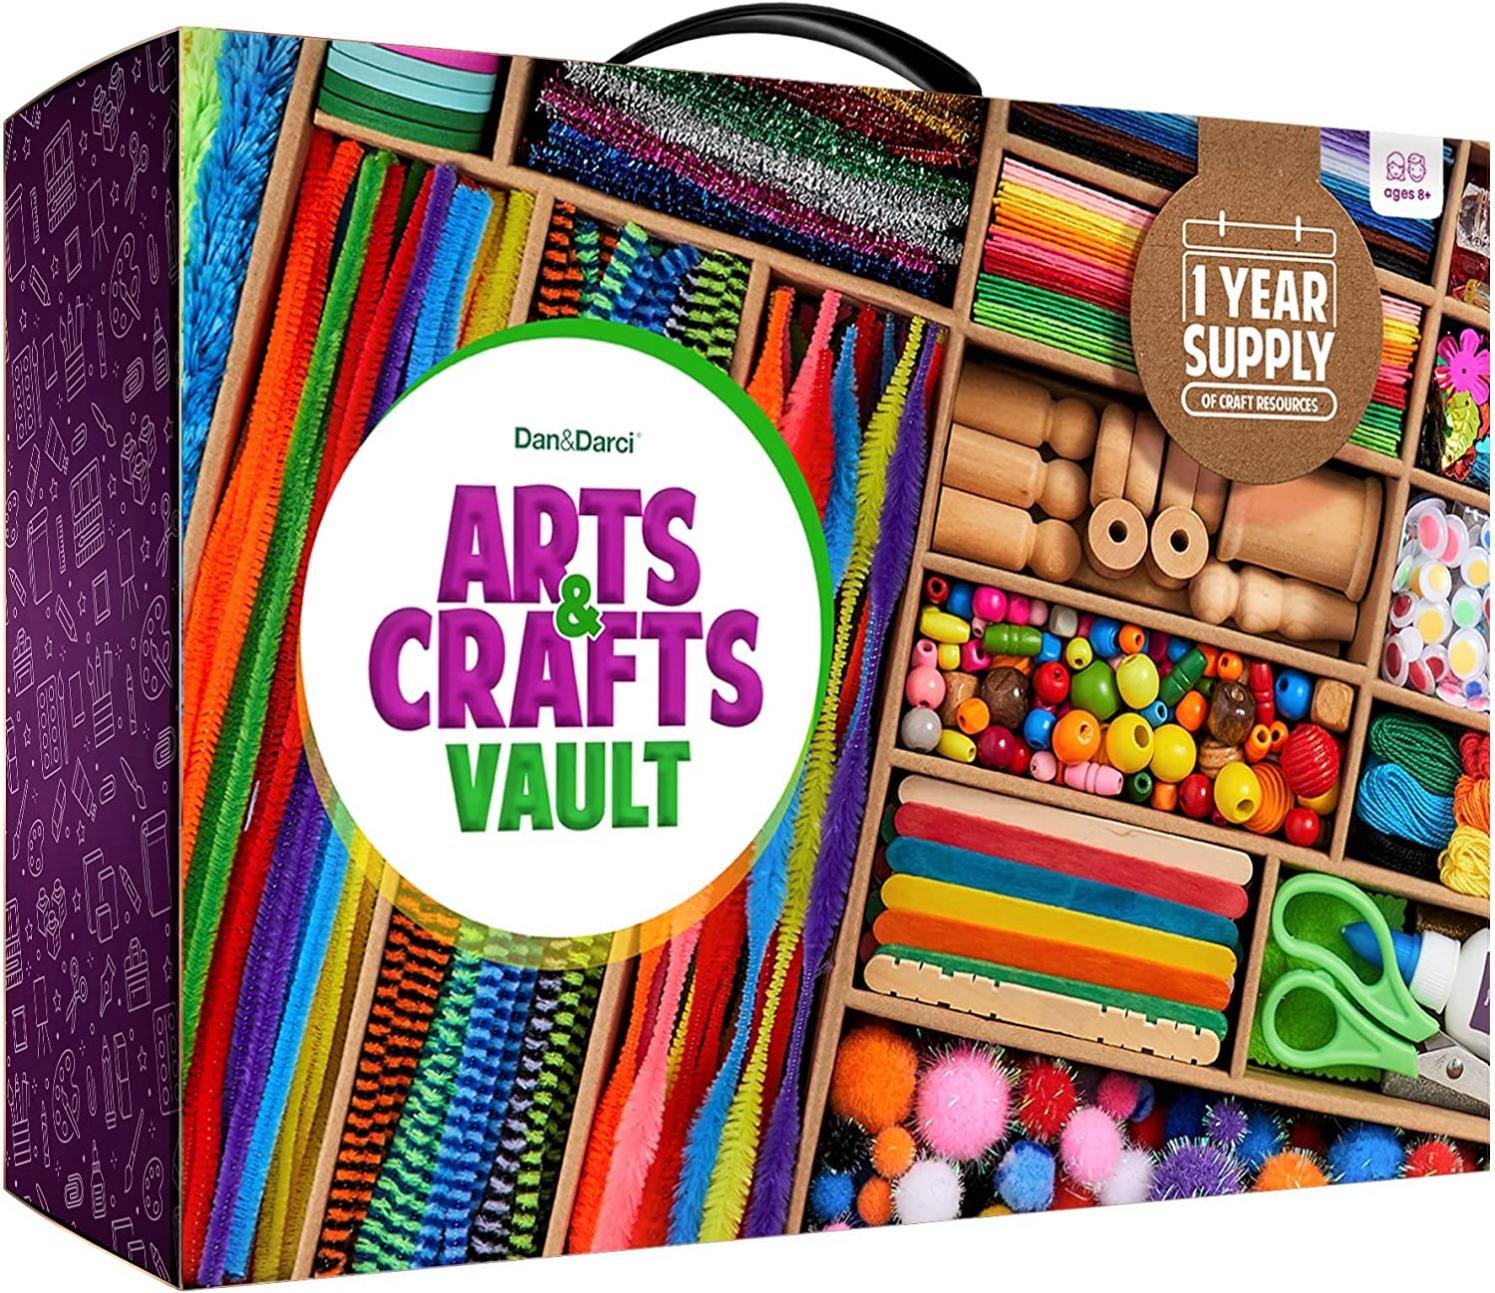 Arts and Crafts Vault - 1000+ Piece Craft Supplies Kit Library in a Box for Kids Ages 4 5 6 7 8 9 10 11 & 12 Year Old Girls & Boys - Crafting Set Kits - Gift Ideas for Kids Art Project Activity